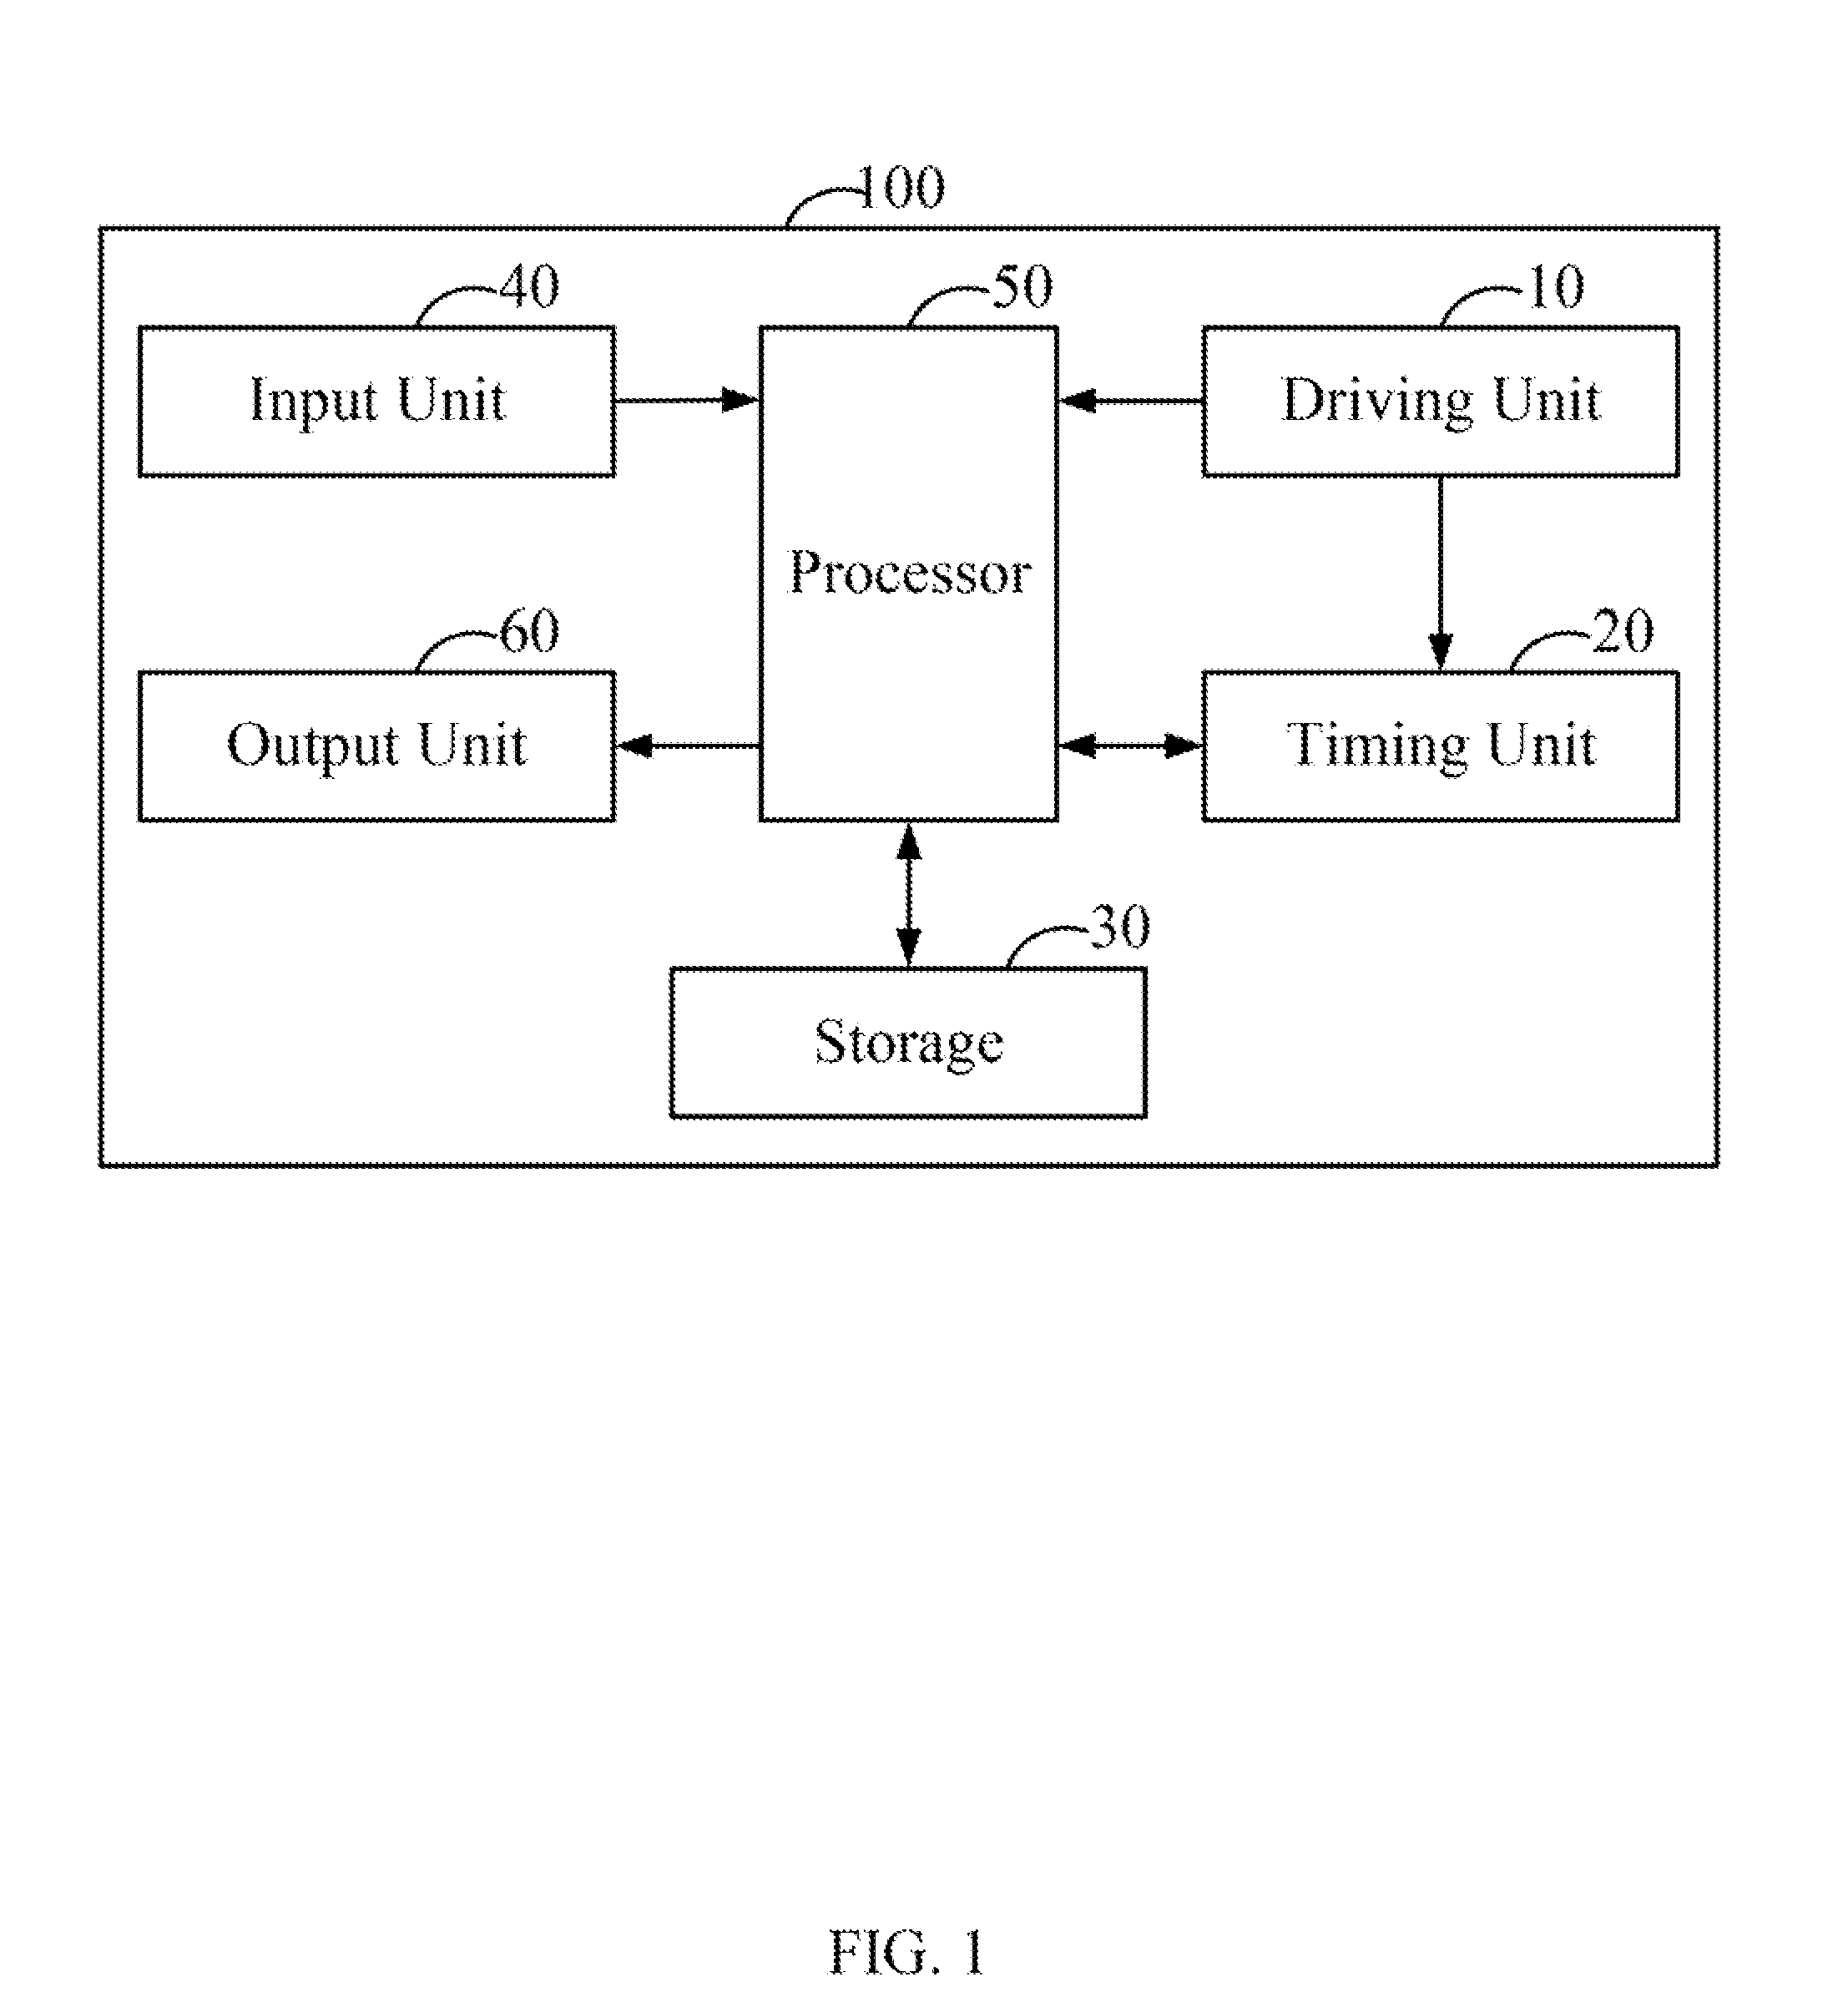 Disc player and burn-in test method for disc player